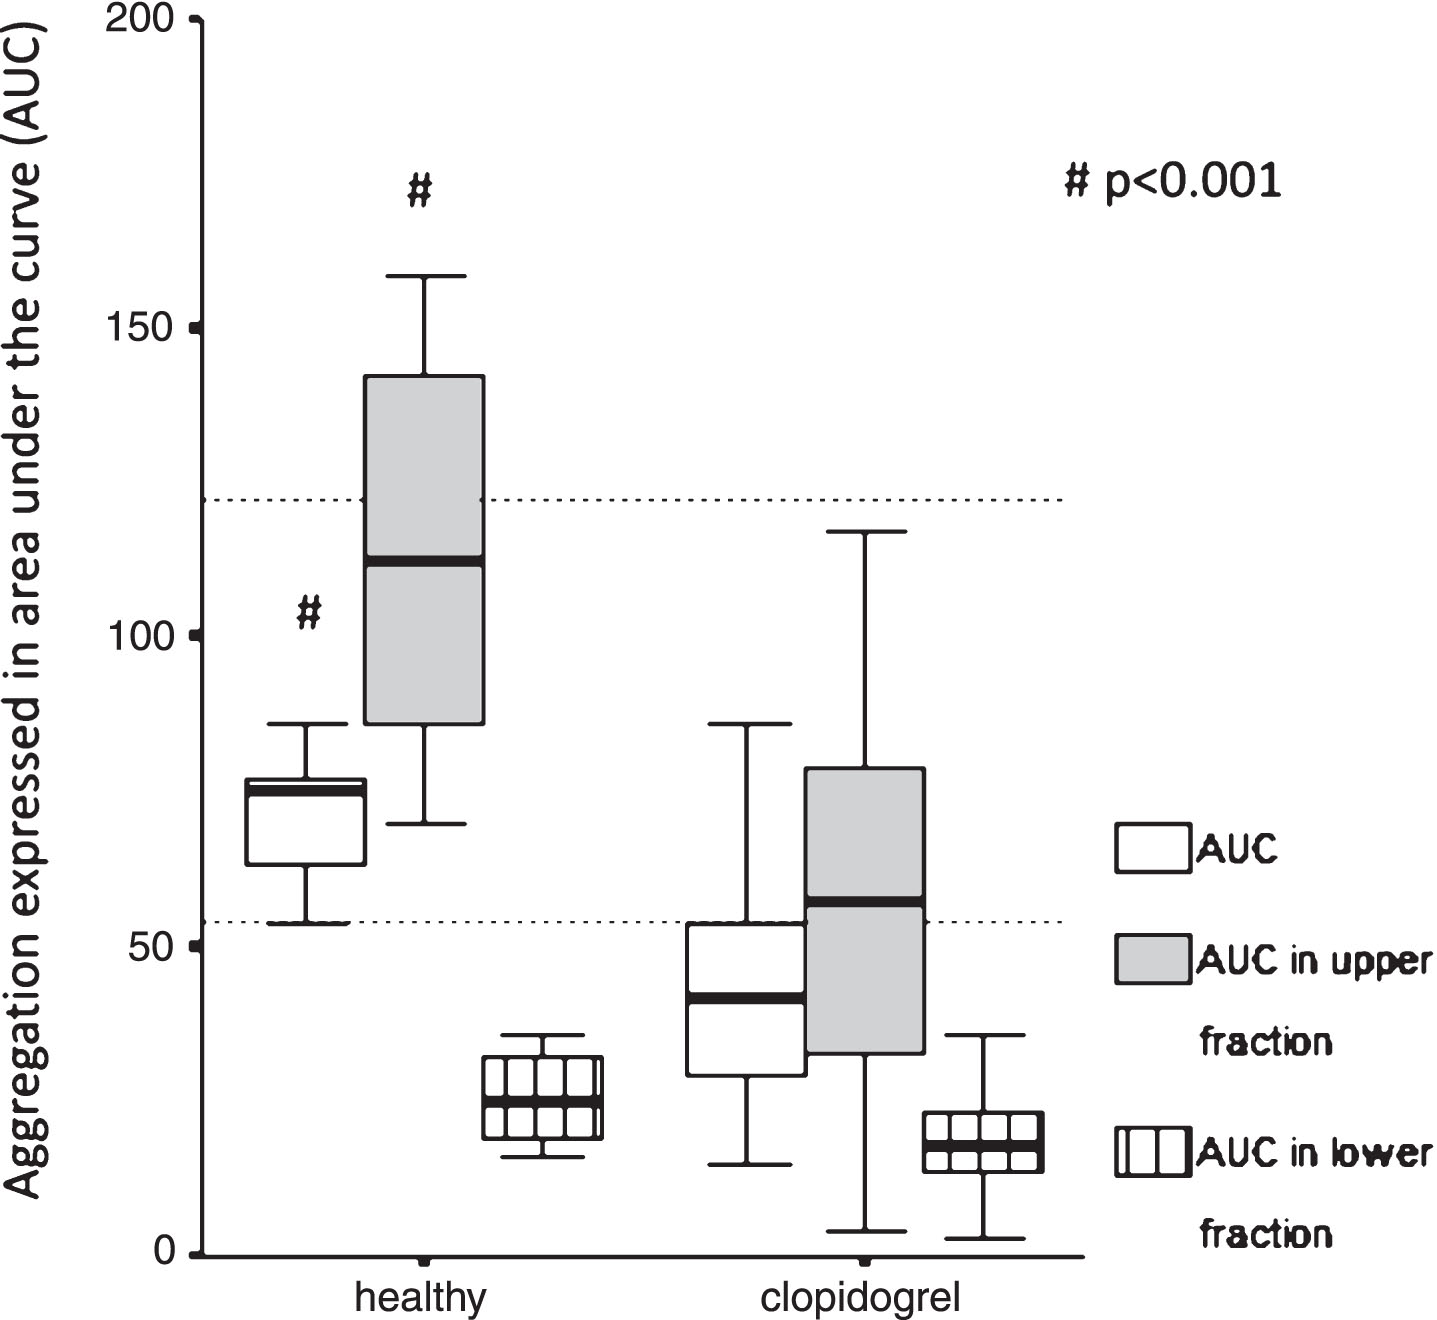 Platelet function test in healthy subjects and patients taking clopidogrel. Comparison of aggregation expressed as area under the curve (AUC) measured in the whole blood and upper/lower fractions separated after 1 hour gravity sedimentation by Multiplate aggregometry in healthy vs. post-stroke patients taking 75 mg clopidogrel. The two horizontal dotted lines indicate the normal range of AUC as a response to ADP stimulation. Healthy intragroup differences: AUC vs. AUC in upper vs. AUC in lower fraction, p = 0.005 respectively. Clopidogrel intragroup differences: AUC vs. AUC in upper vs. AUC in lower fraction, p < 0.001 respectively. Data are shown as median and 25th–75th percentiles (# indicate intergroup differences p < 0.001 respectively).